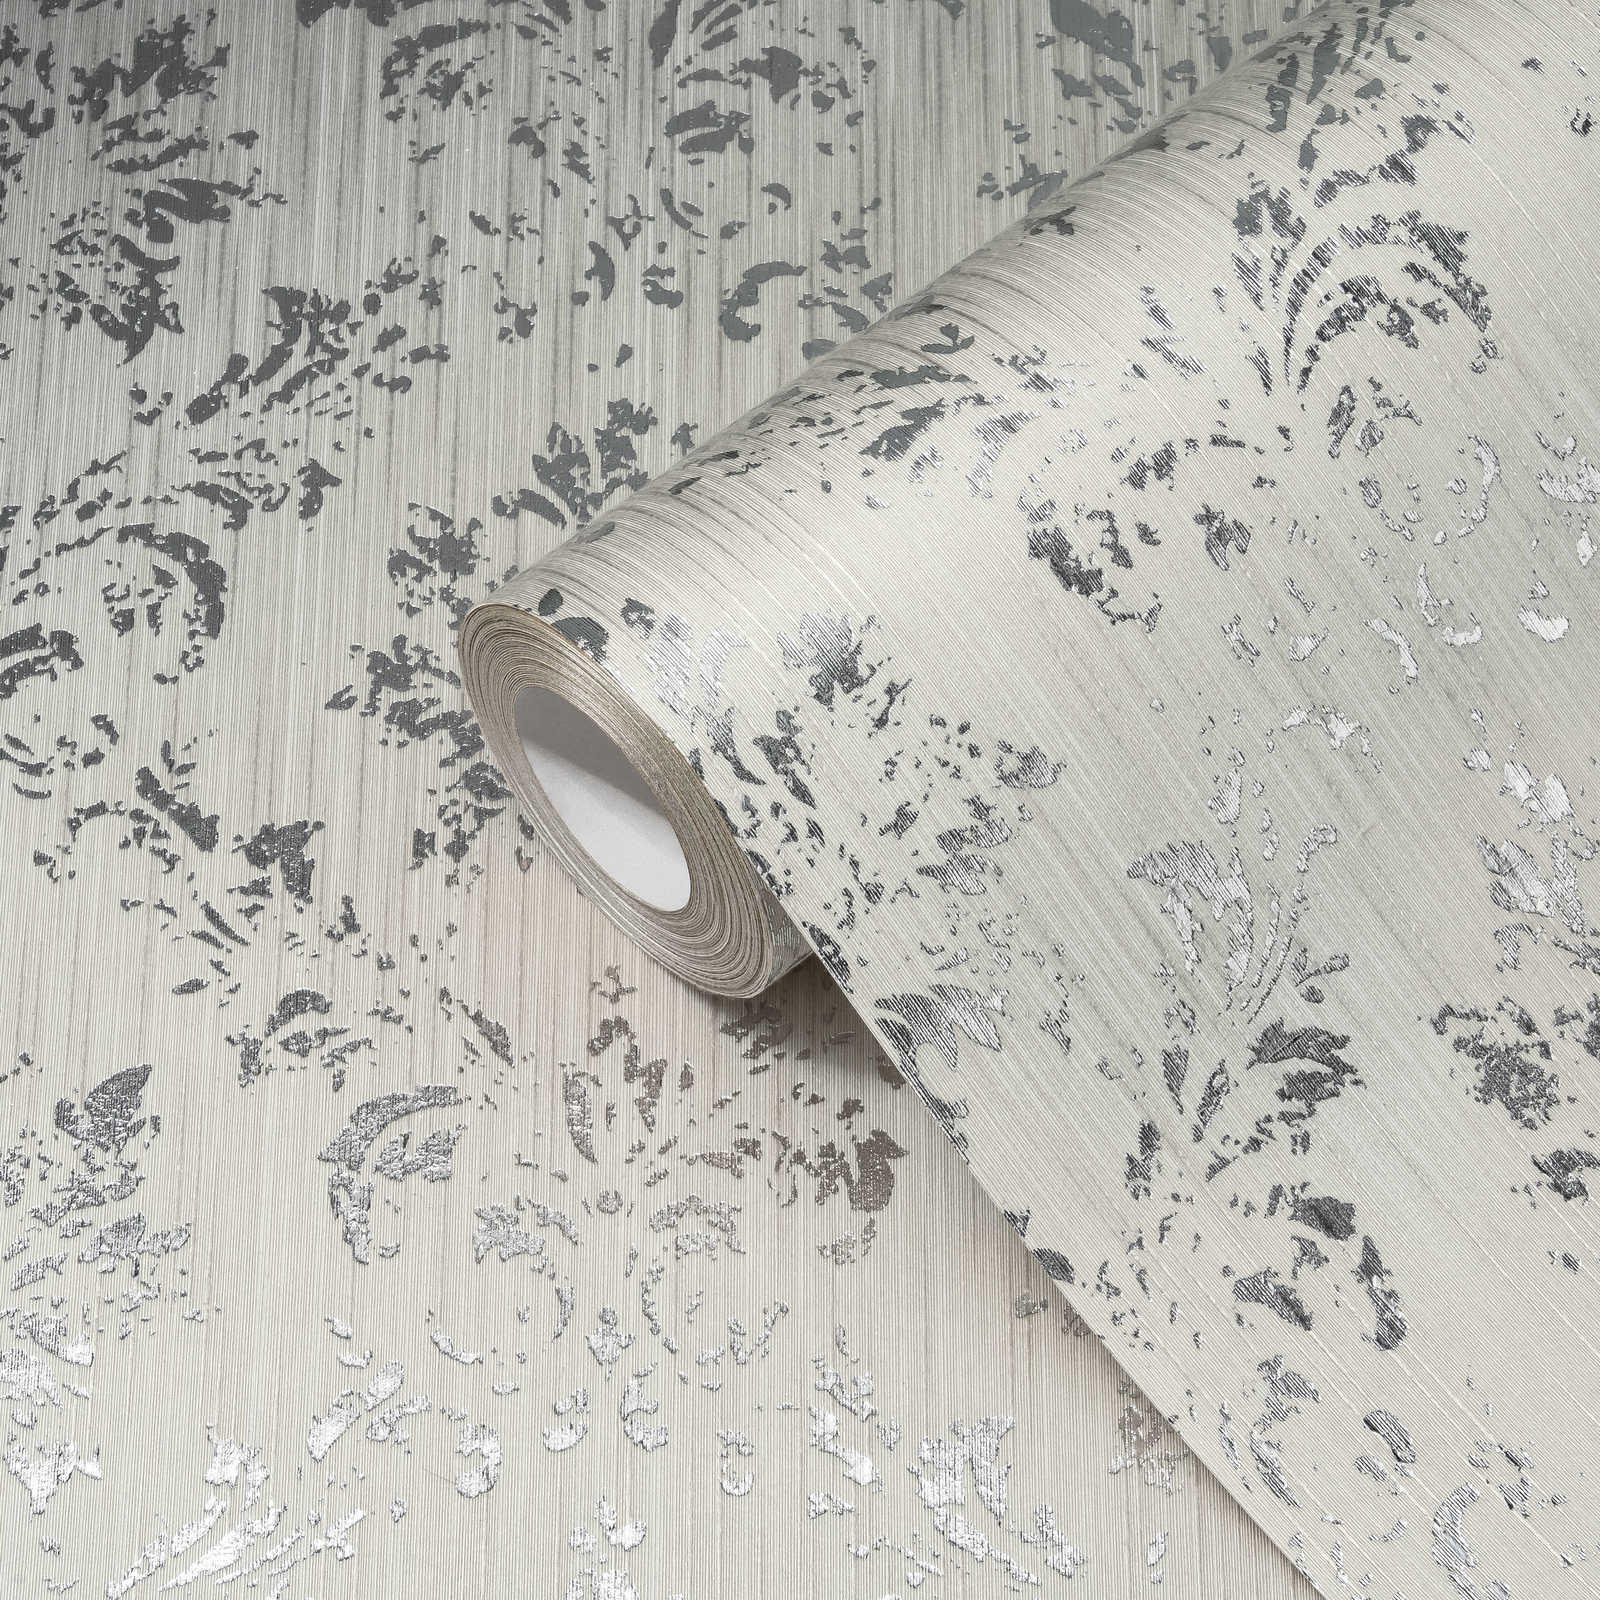             Wallpaper with silver ornaments in used look - grey, silver
        